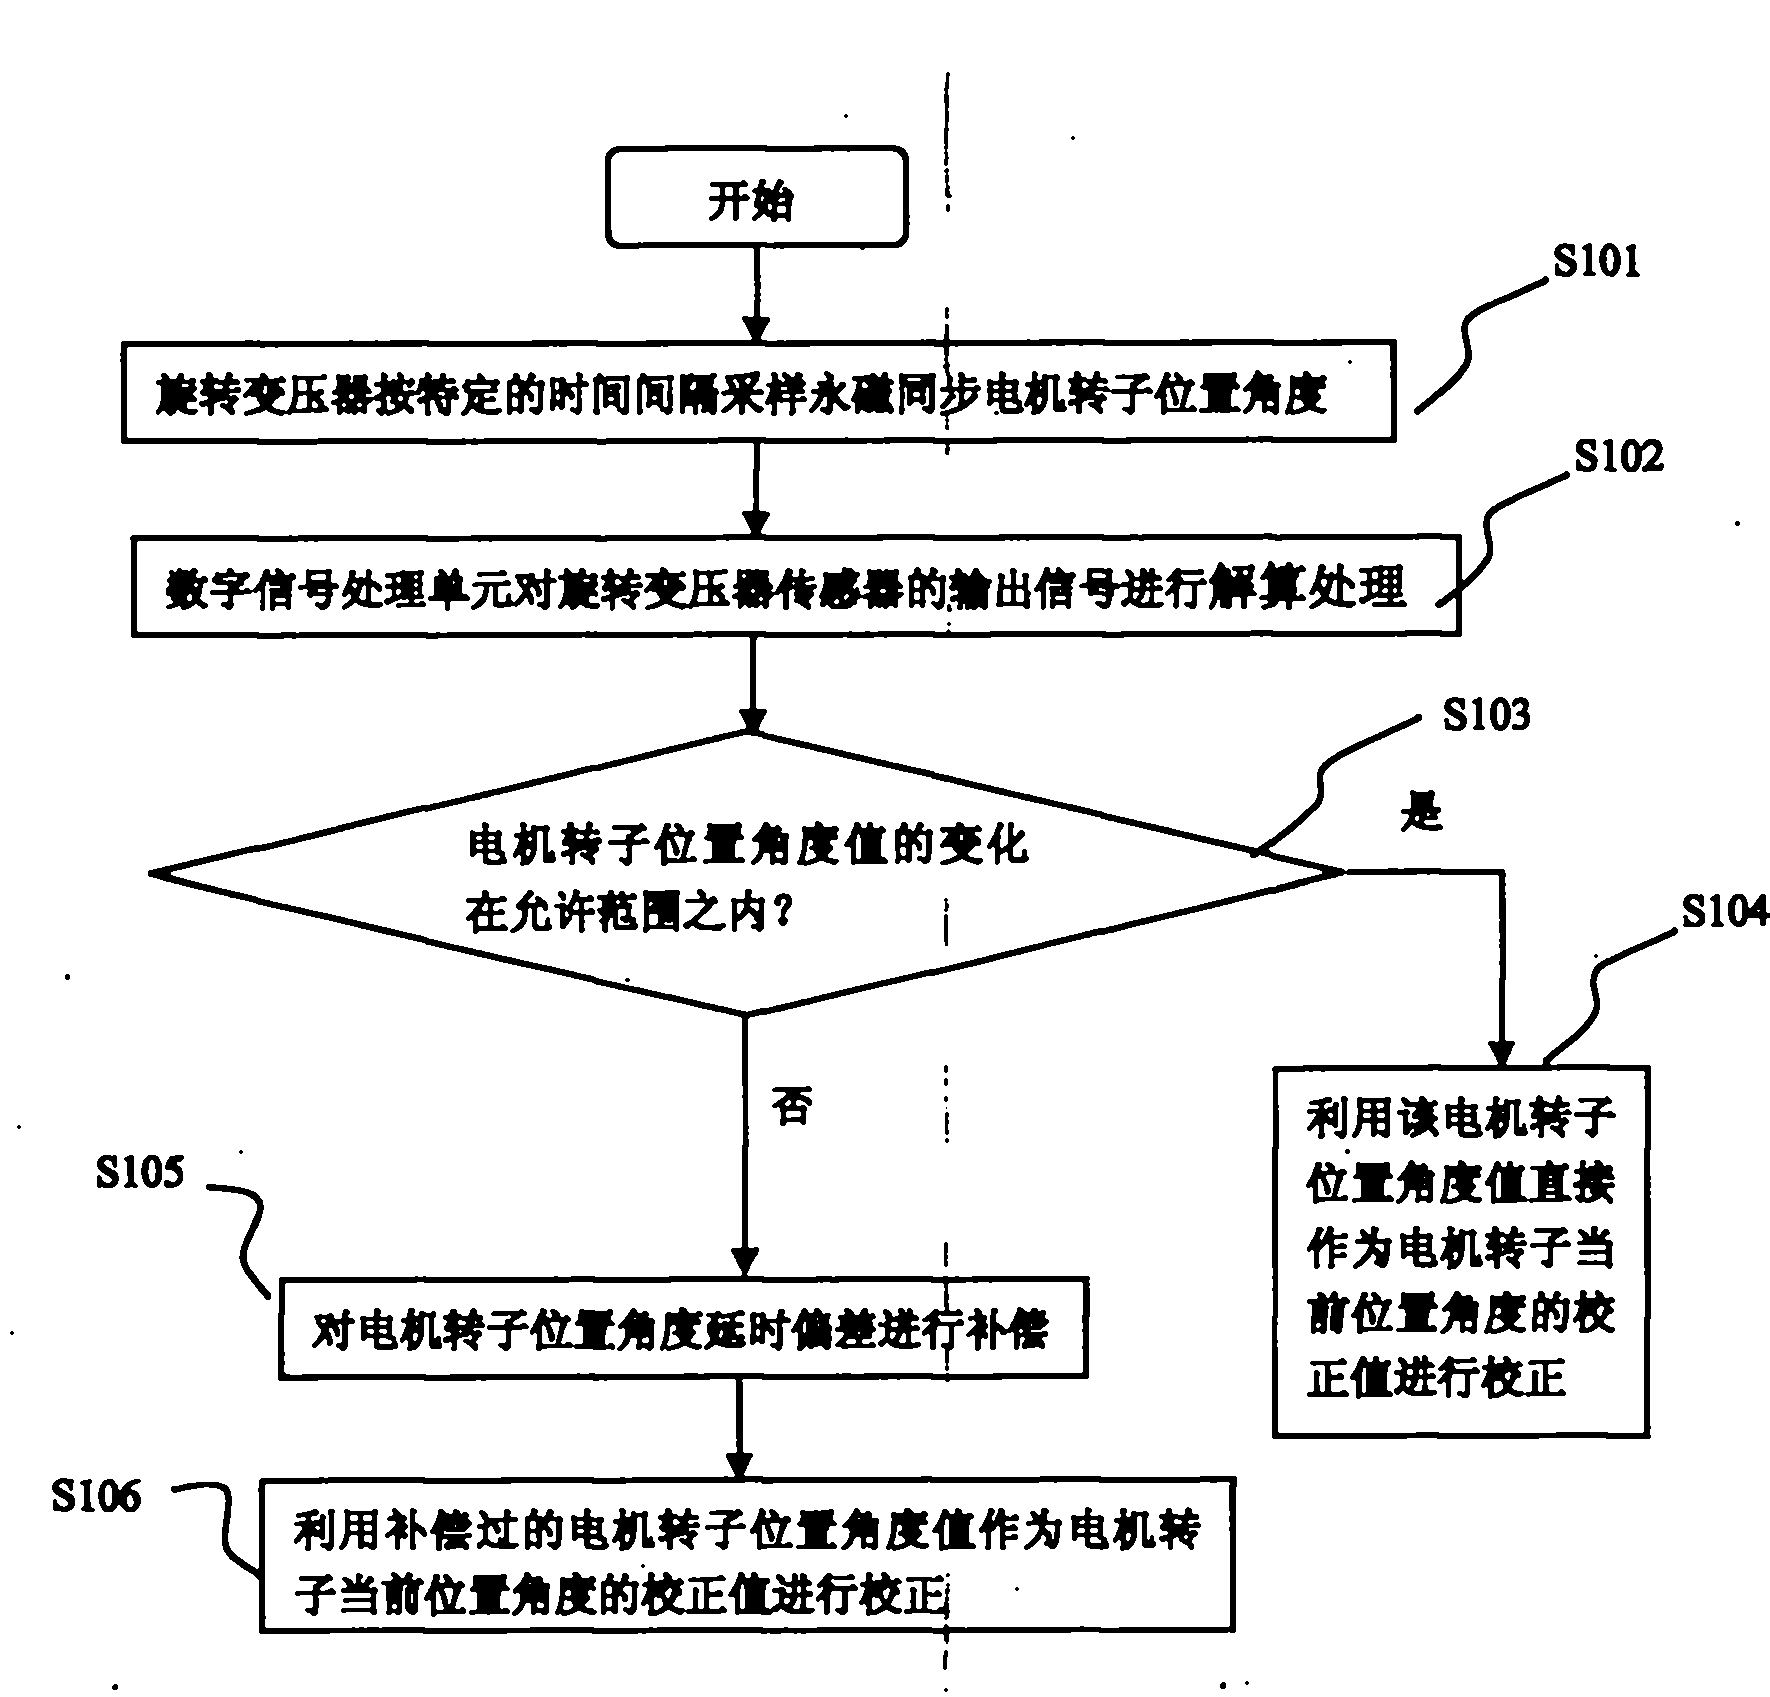 Compensation method for rotor position angle of permanent-magnet motor